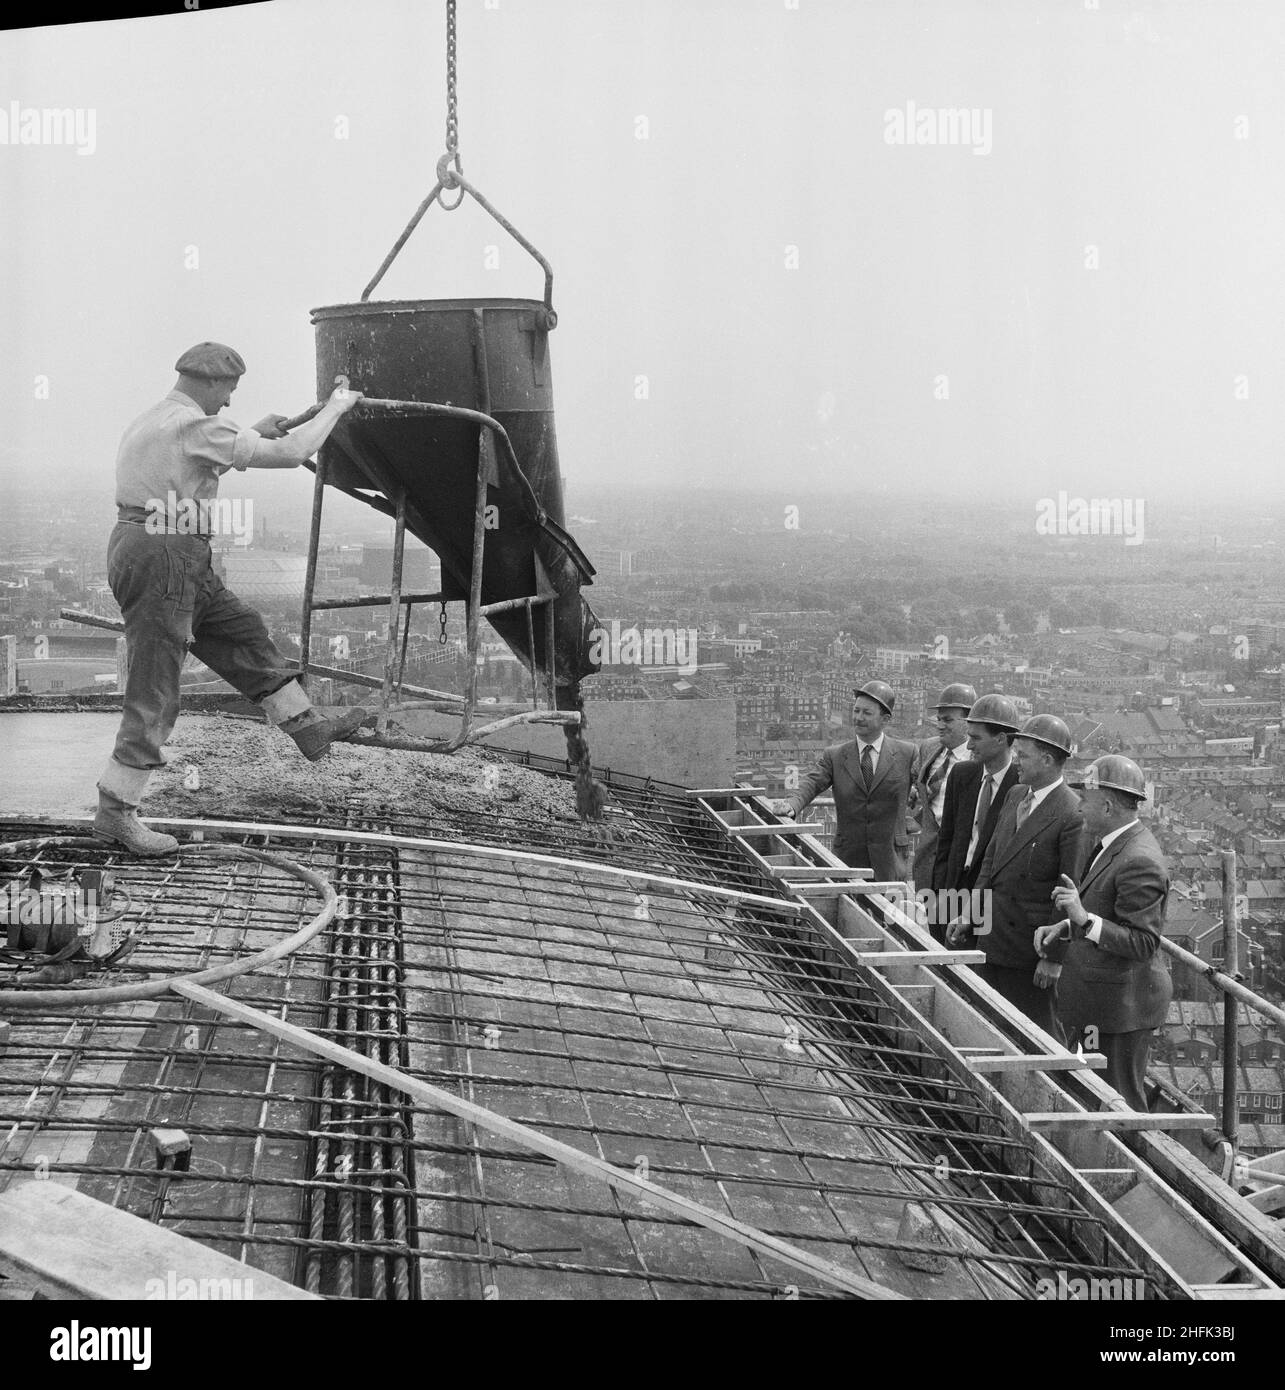 Empress State Building, Lillie Road, Earl's Court, Hammersmith and Fulham, London, 03/07/1961. Managers gathering to watch a worker pour out the topmost load of concrete on the roof of the Empress State Building, Earl's Court, London. The men pictured, left to right are: GE Margetts, Agent, P Clarke, R Hill, C Farrow, General Foreman and W Pitman, District Manager. This photograph was used in the August 1961 issue of Team Spirit, the Laing company newsletter. Stock Photo